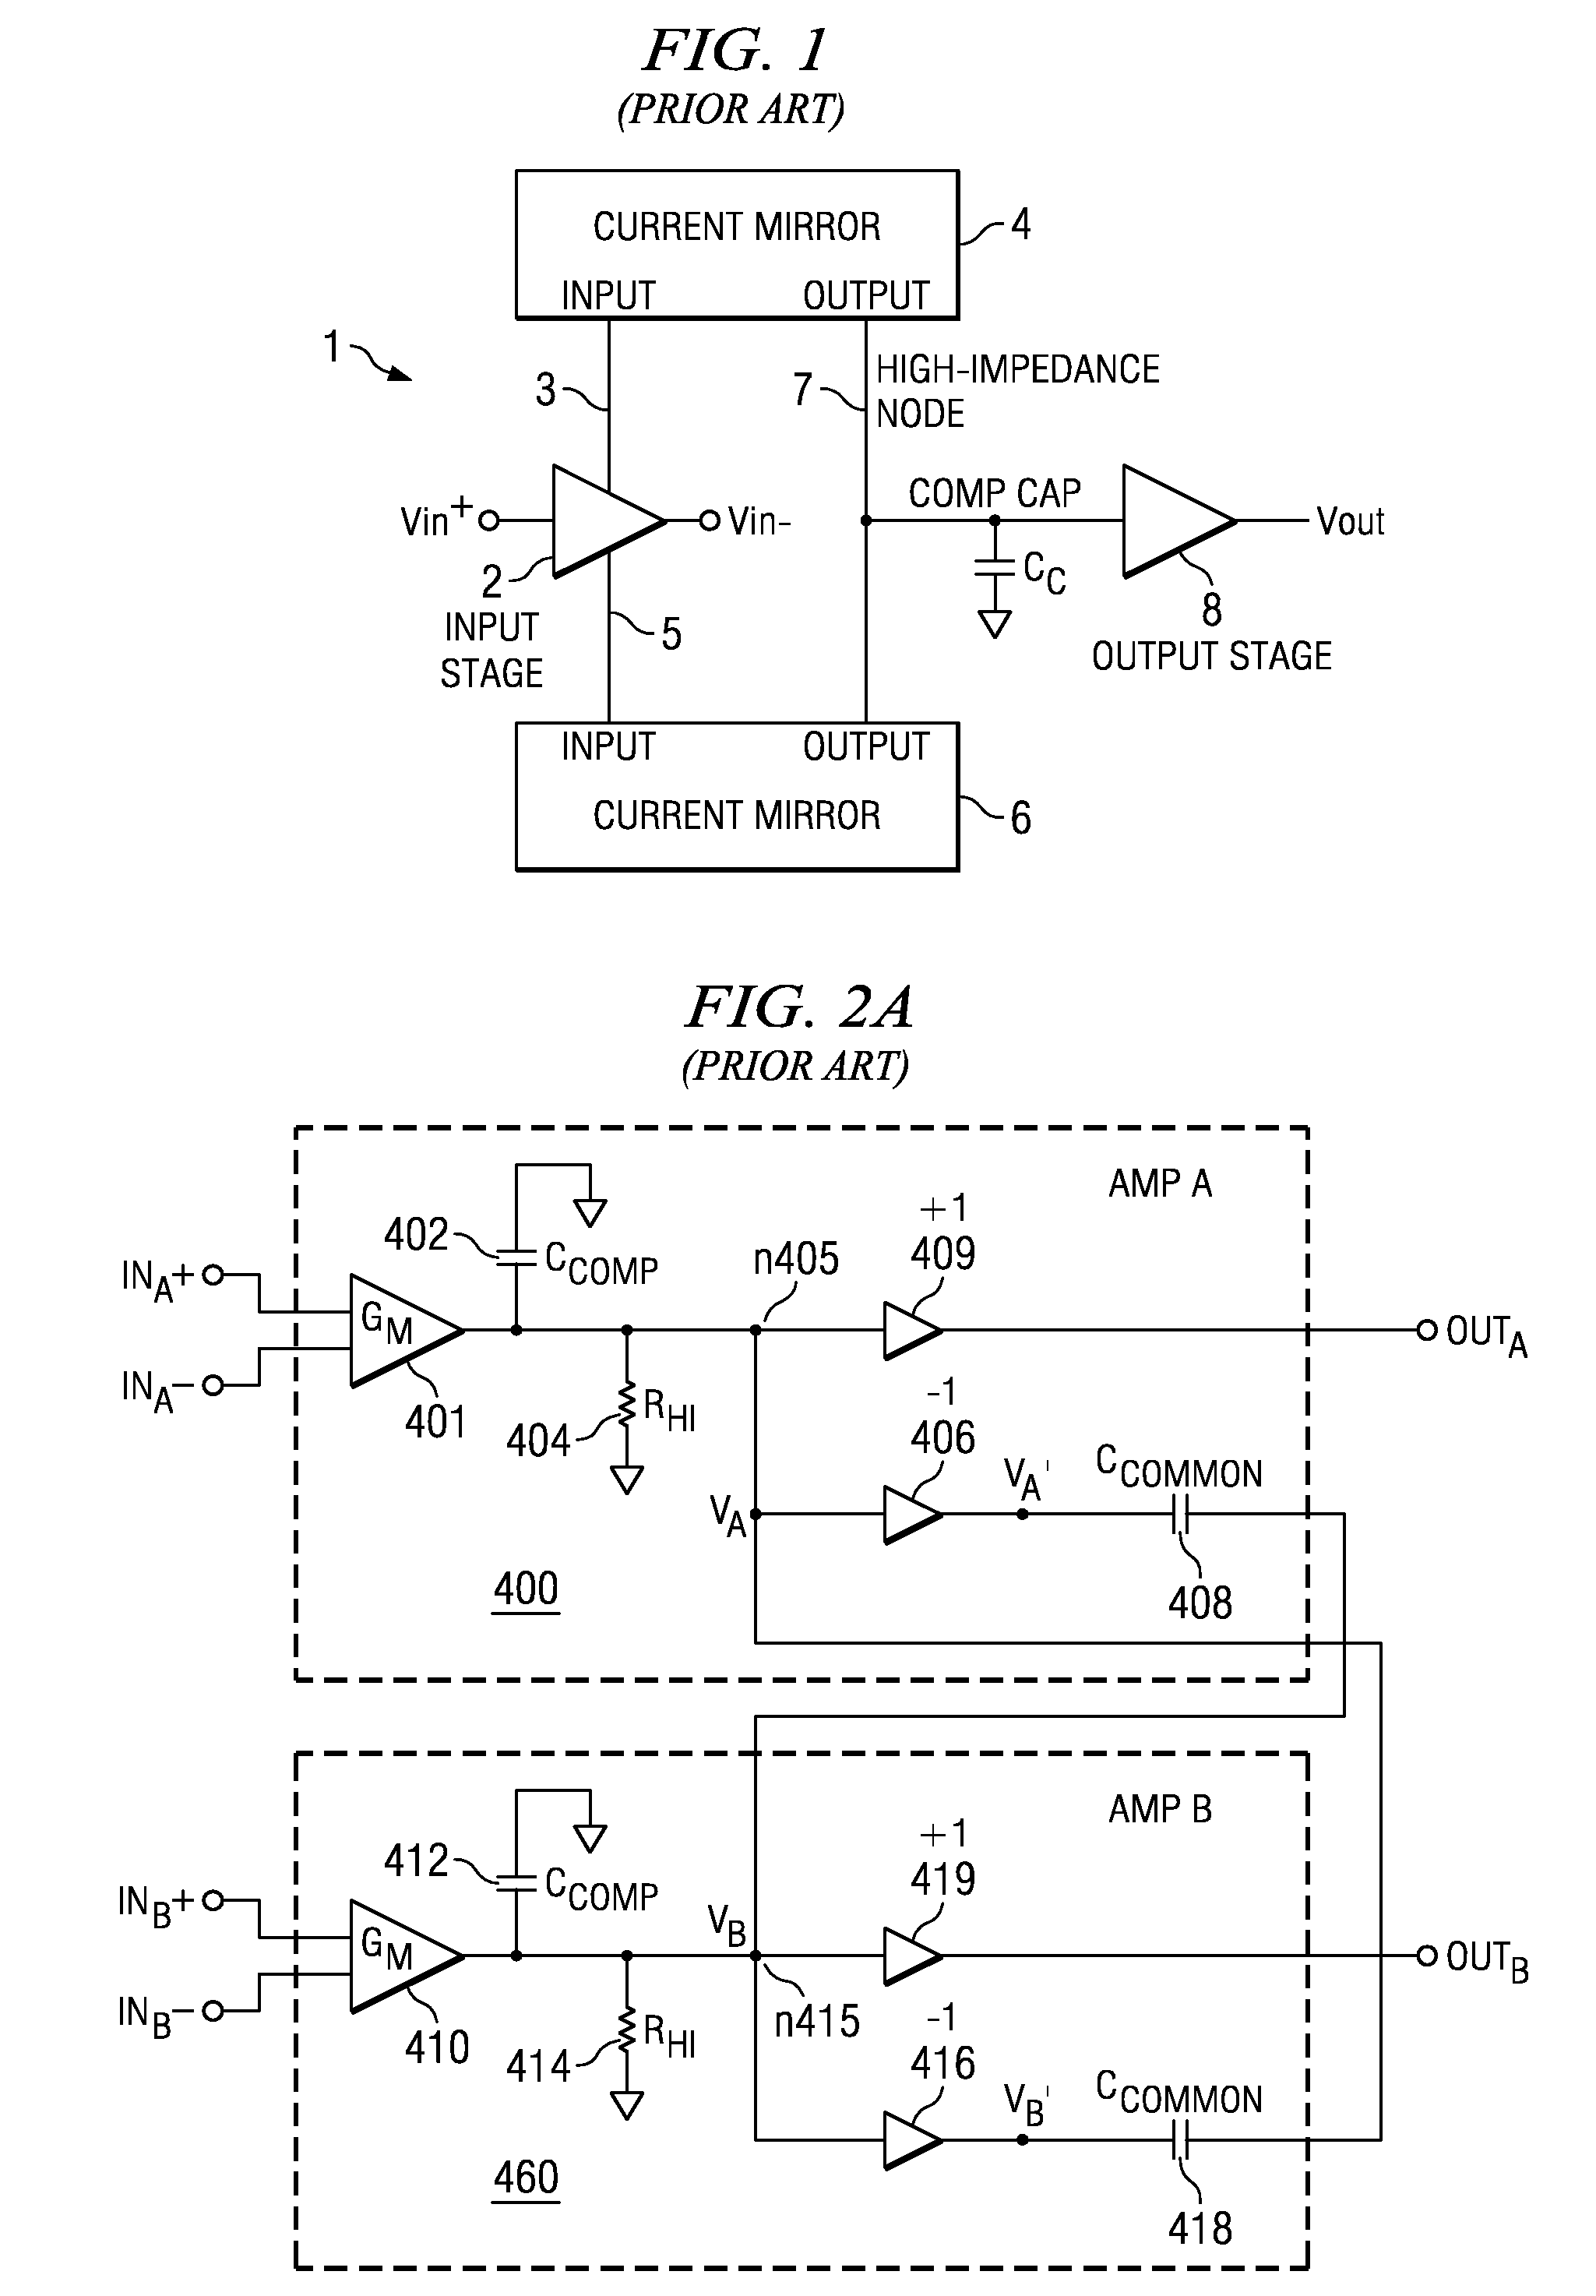 Common-mode bandwidth reduction circuit and method for differential applications